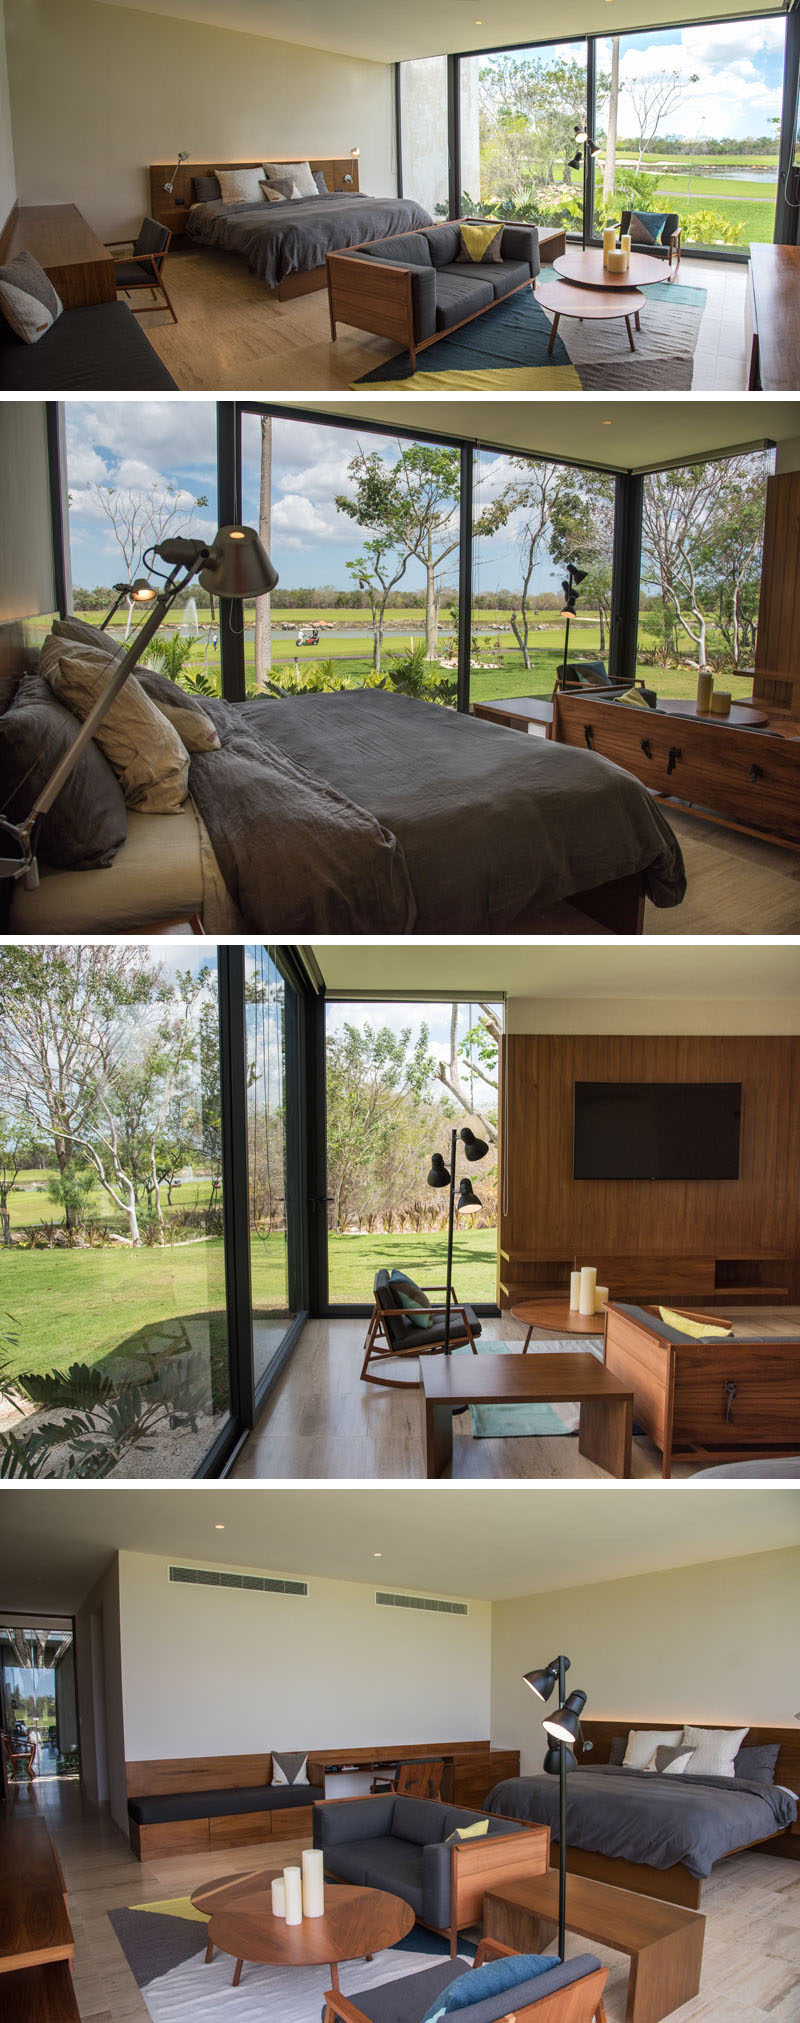 This modern master bedroom, with a lounge and built-in desk, looks out onto the backyard through floor-to-ceiling windows.